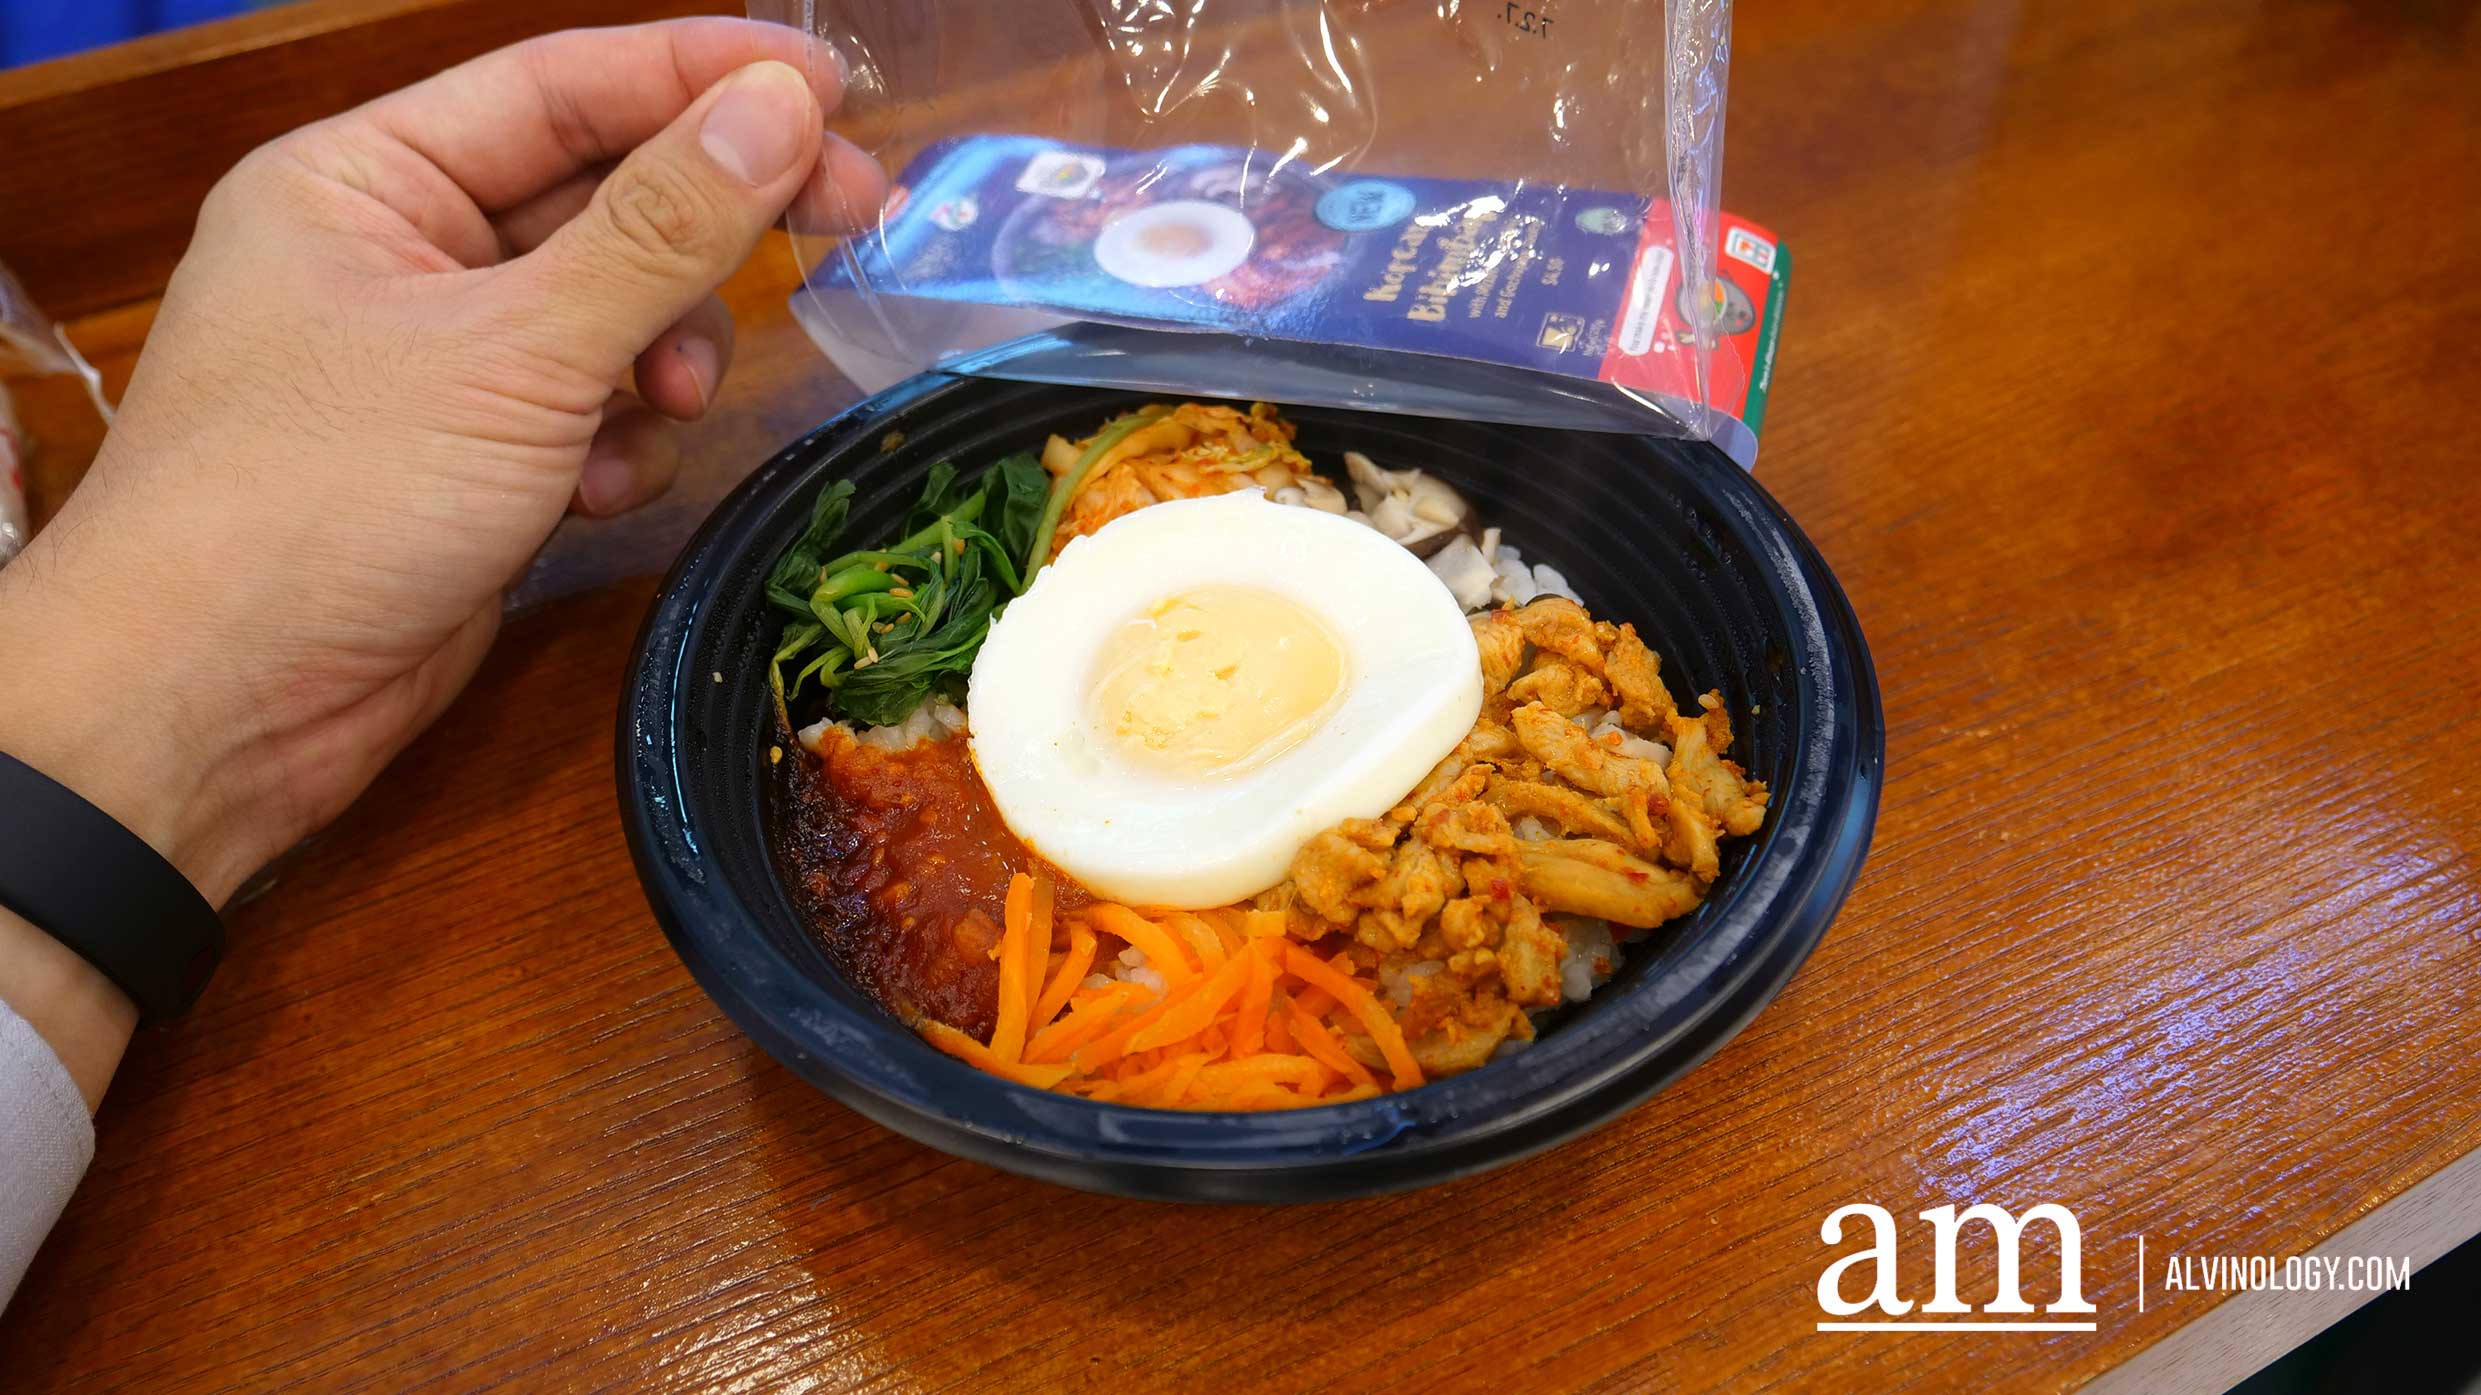 Luncheon Meat Onigiri to Korean Bibimpap: Five Surprisingly Exotic Ready-to-eat Meals at 7-Eleven Singapore - Alvinology